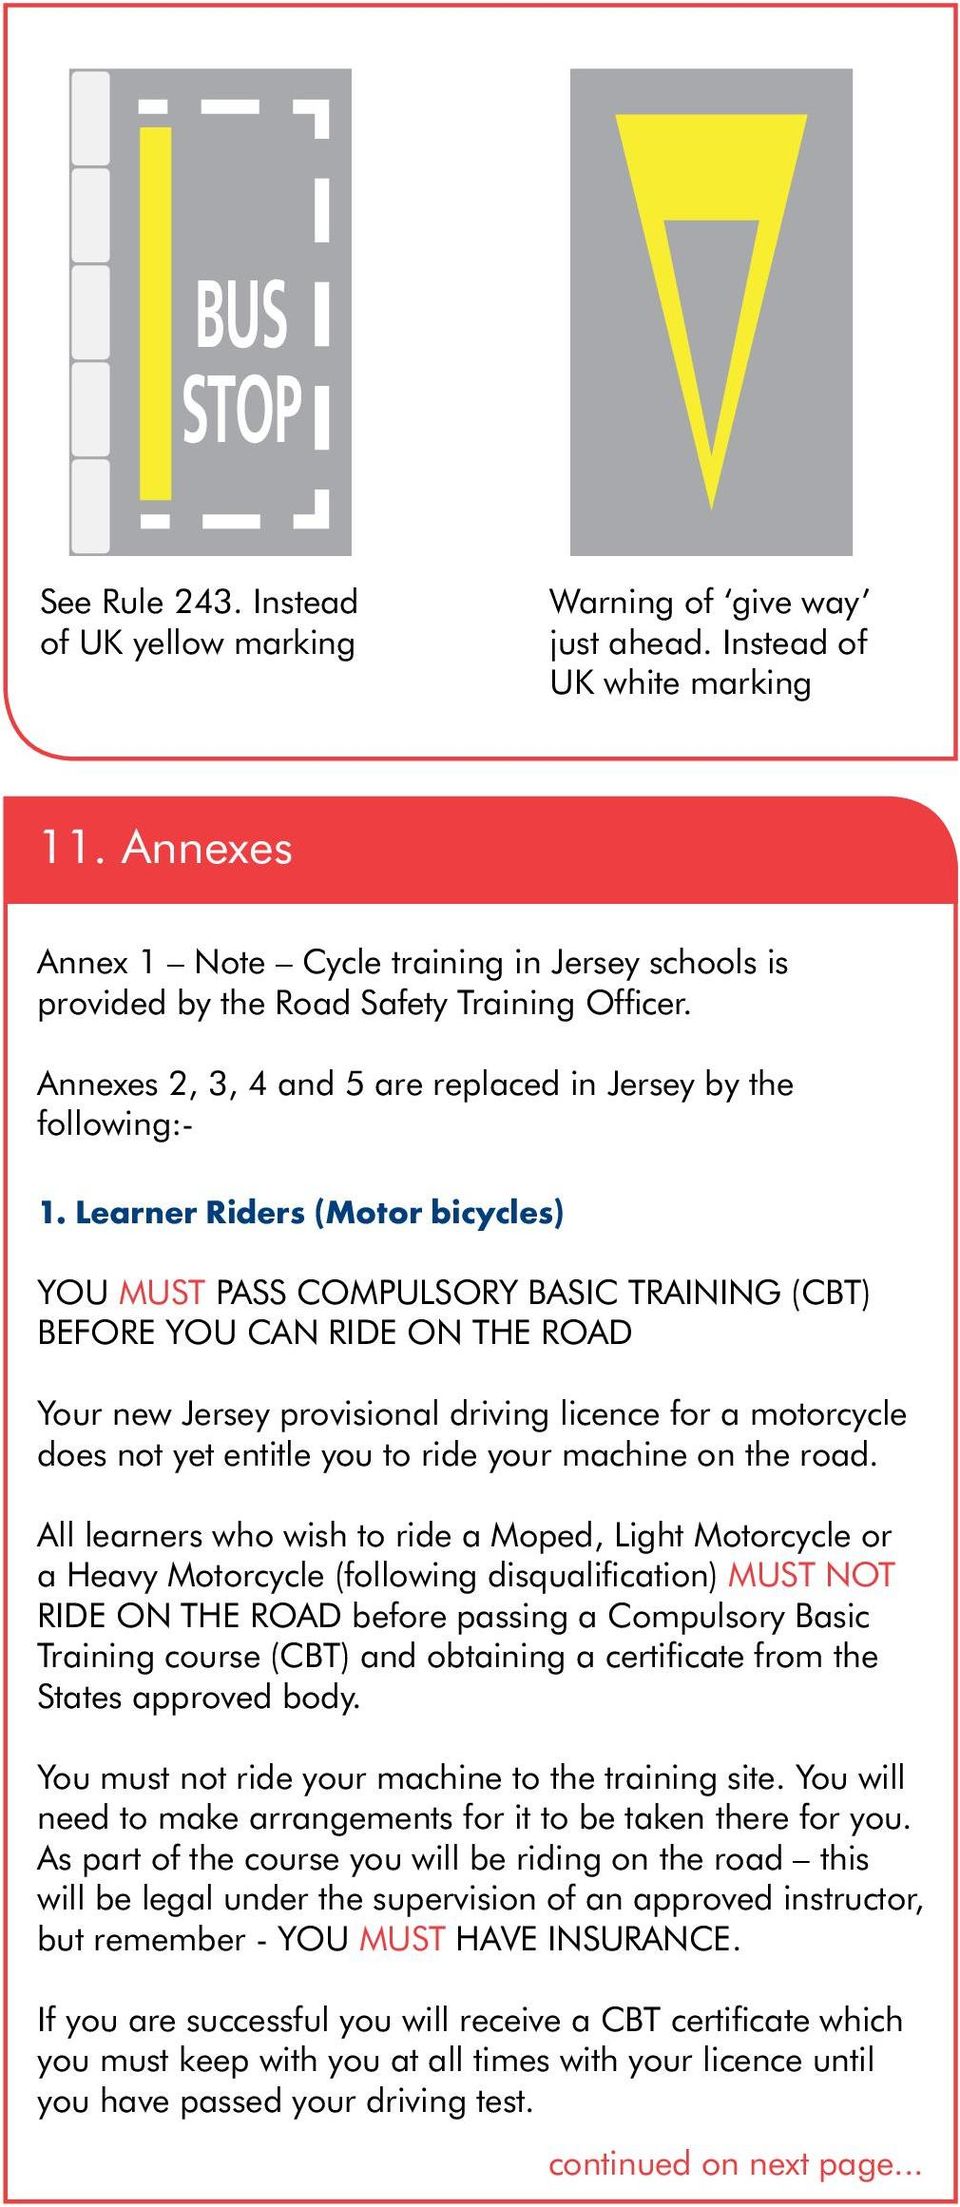 Learner Riders (Motor bicycles) YOU MUST PASS COMPULSORY BASIC TRAINING (CBT) BEFORE YOU CAN RIDE ON THE ROAD Your new Jersey provisional driving licence for a motorcycle does not yet entitle you to